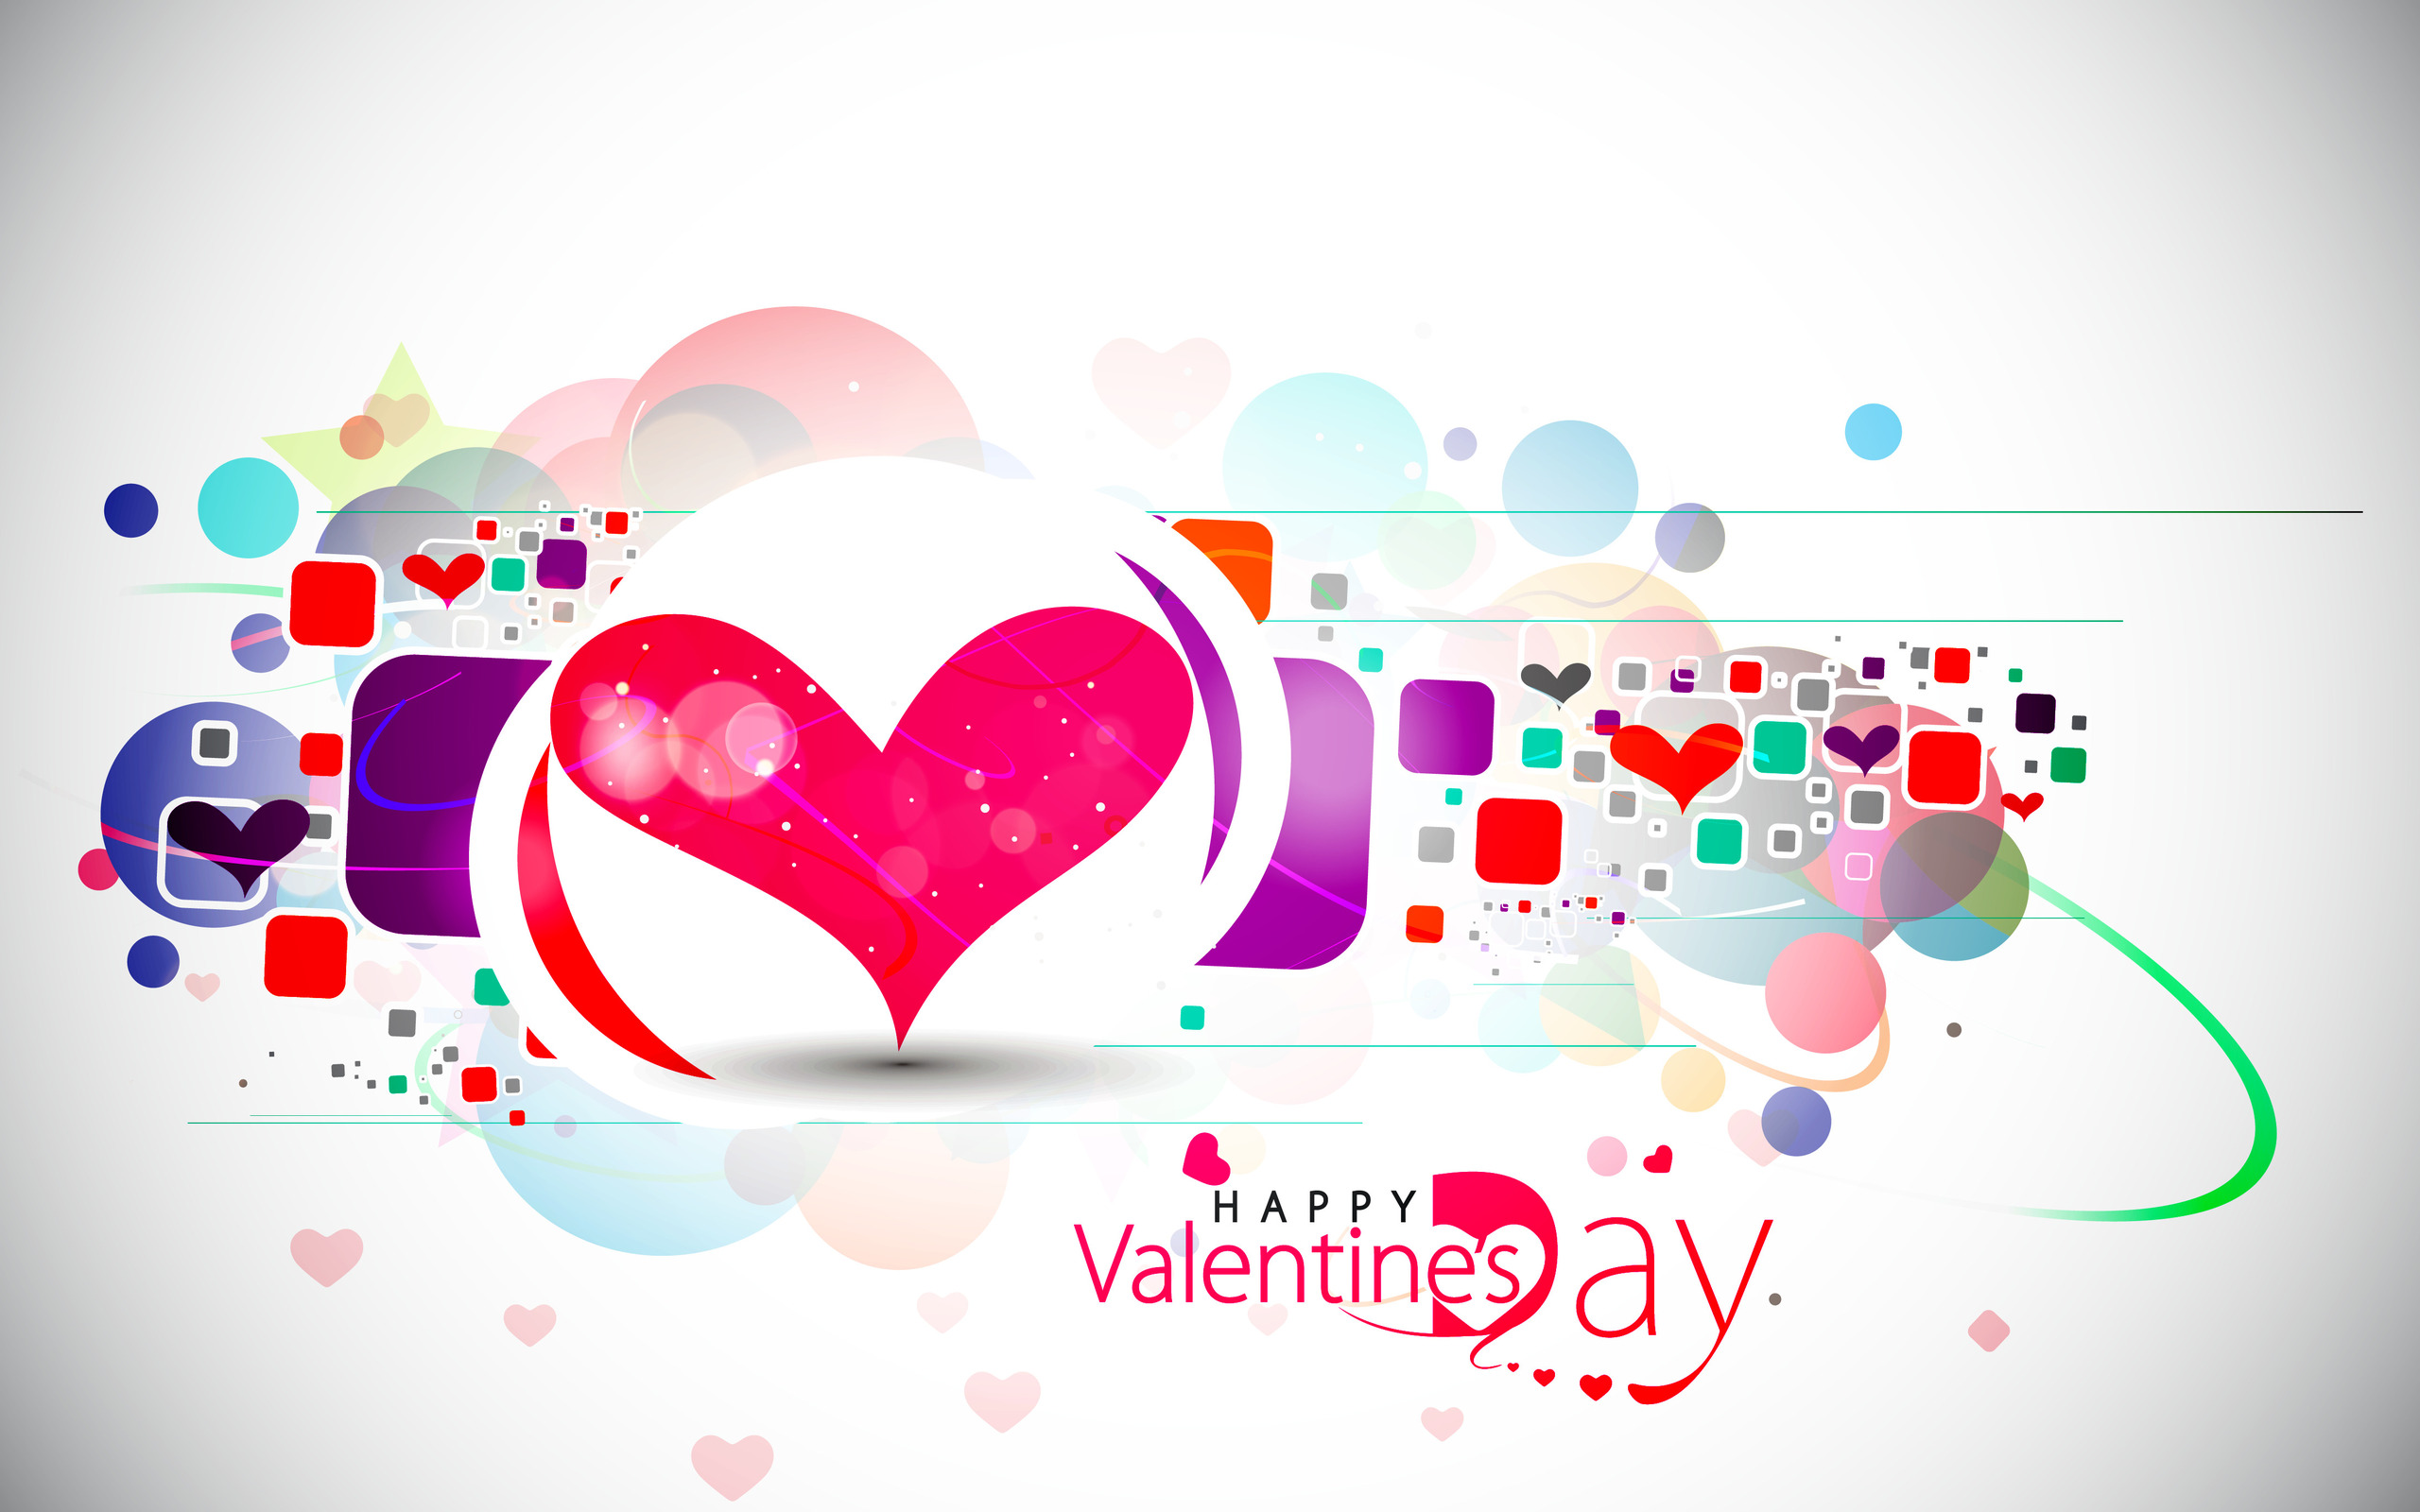 Happy Valentine’s Day 2016 Whatsapp Status and Facebook Messages – Whatsapp Lover 